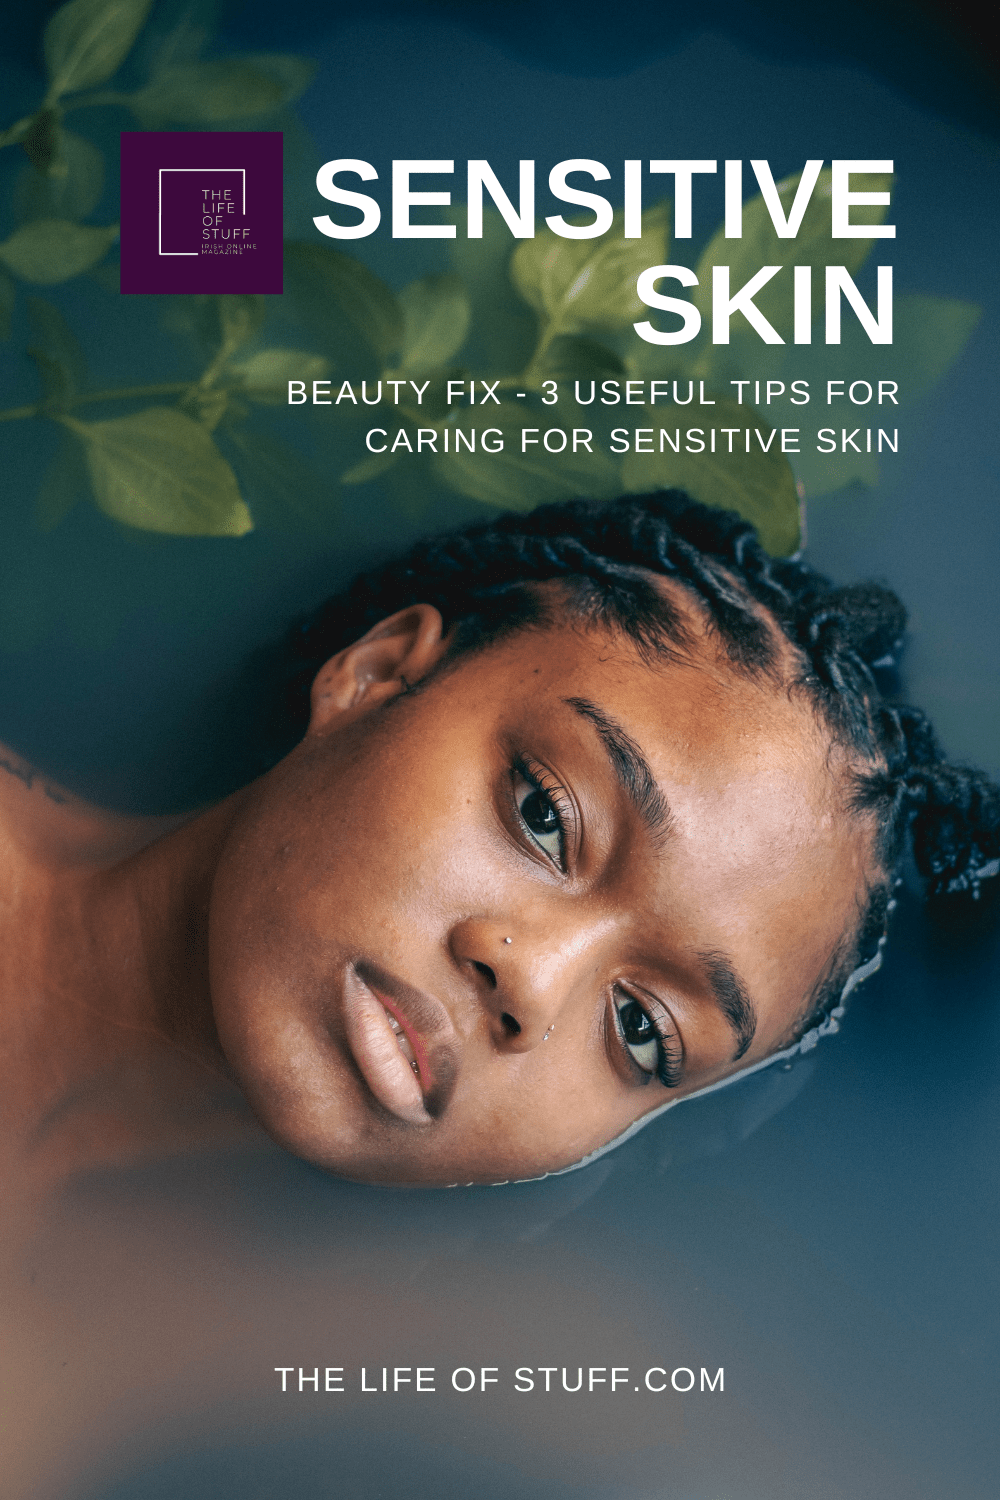 Beauty Fix - 3 Useful Tips For Caring For Sensitive Skin - The Life of Stuff - Irish online magazine